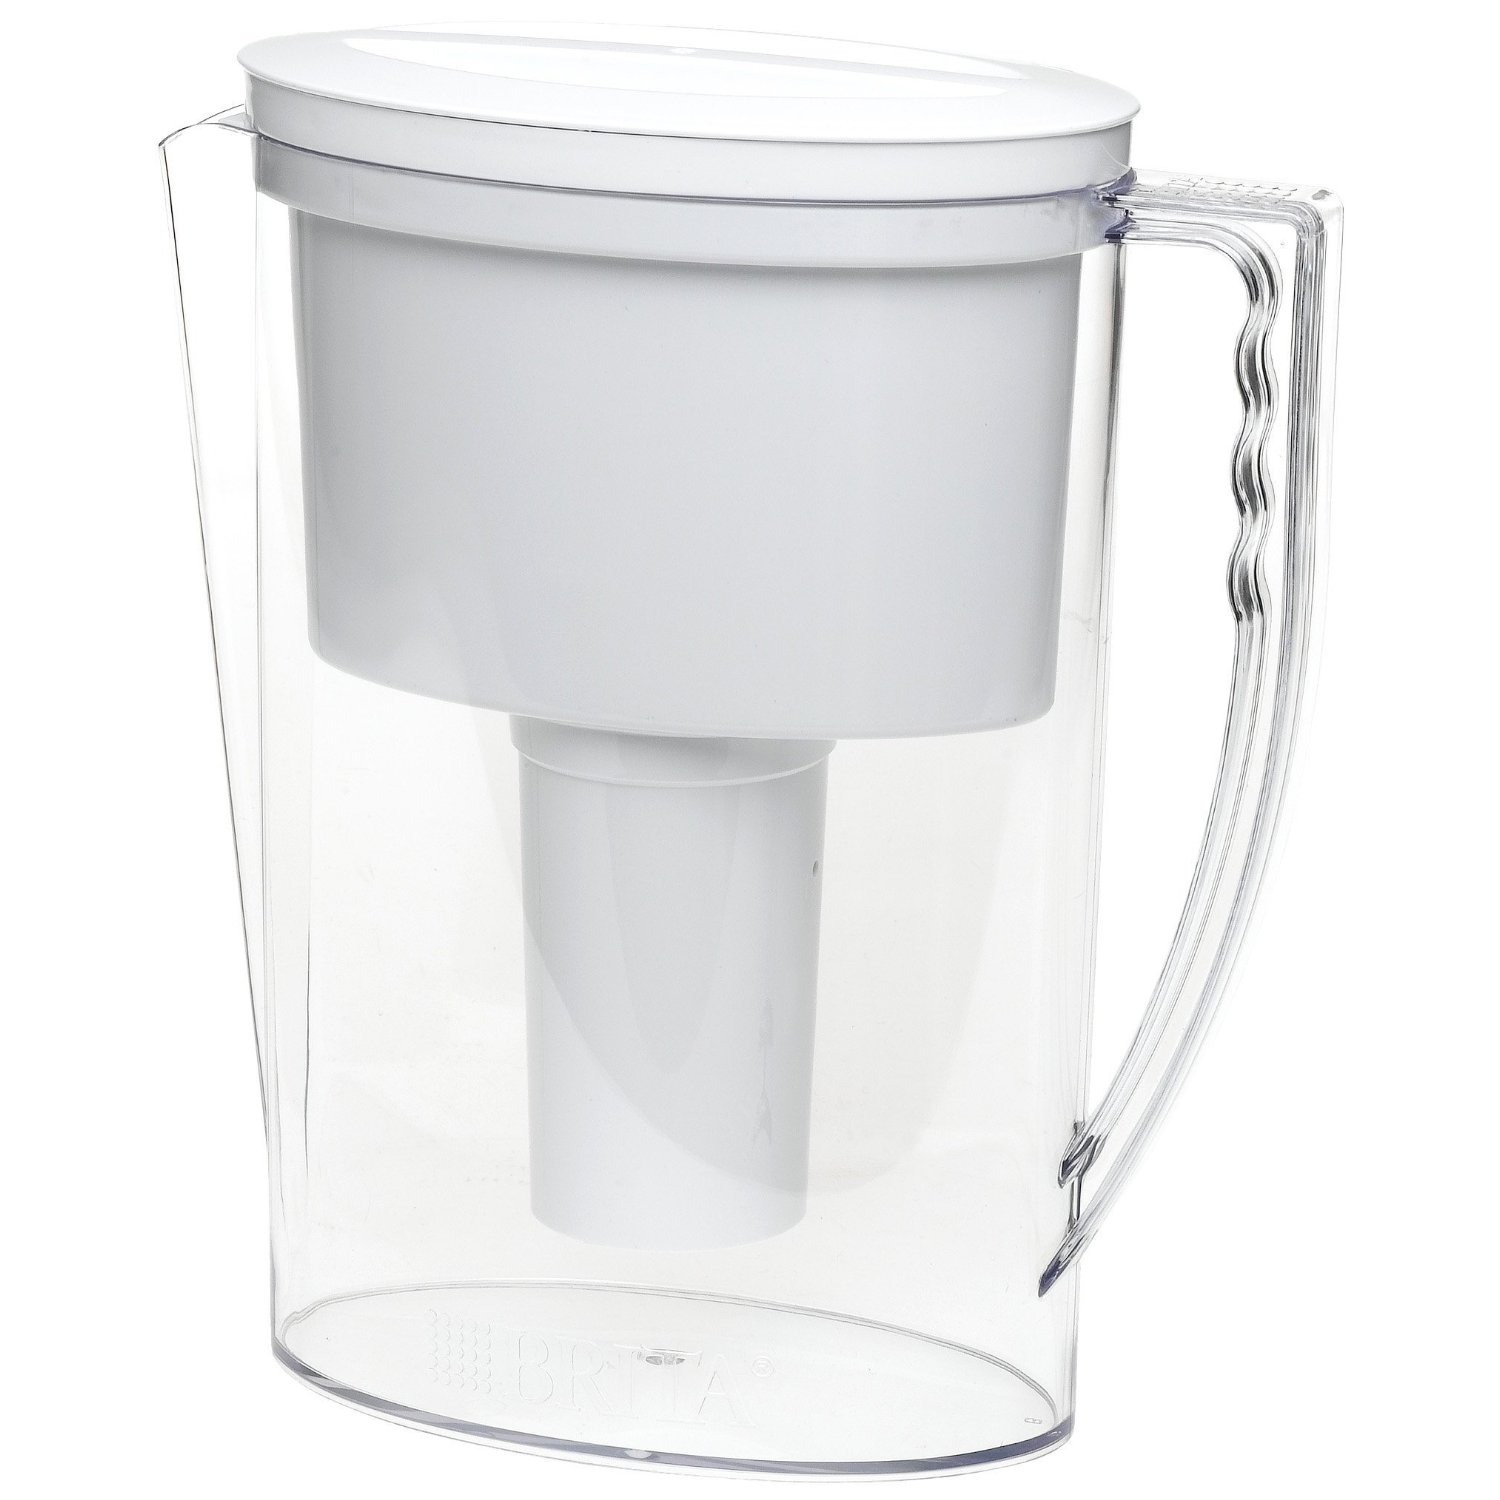 Brita Slim Water Pitcher with 1 Filter, White, 5 Cup $6.19